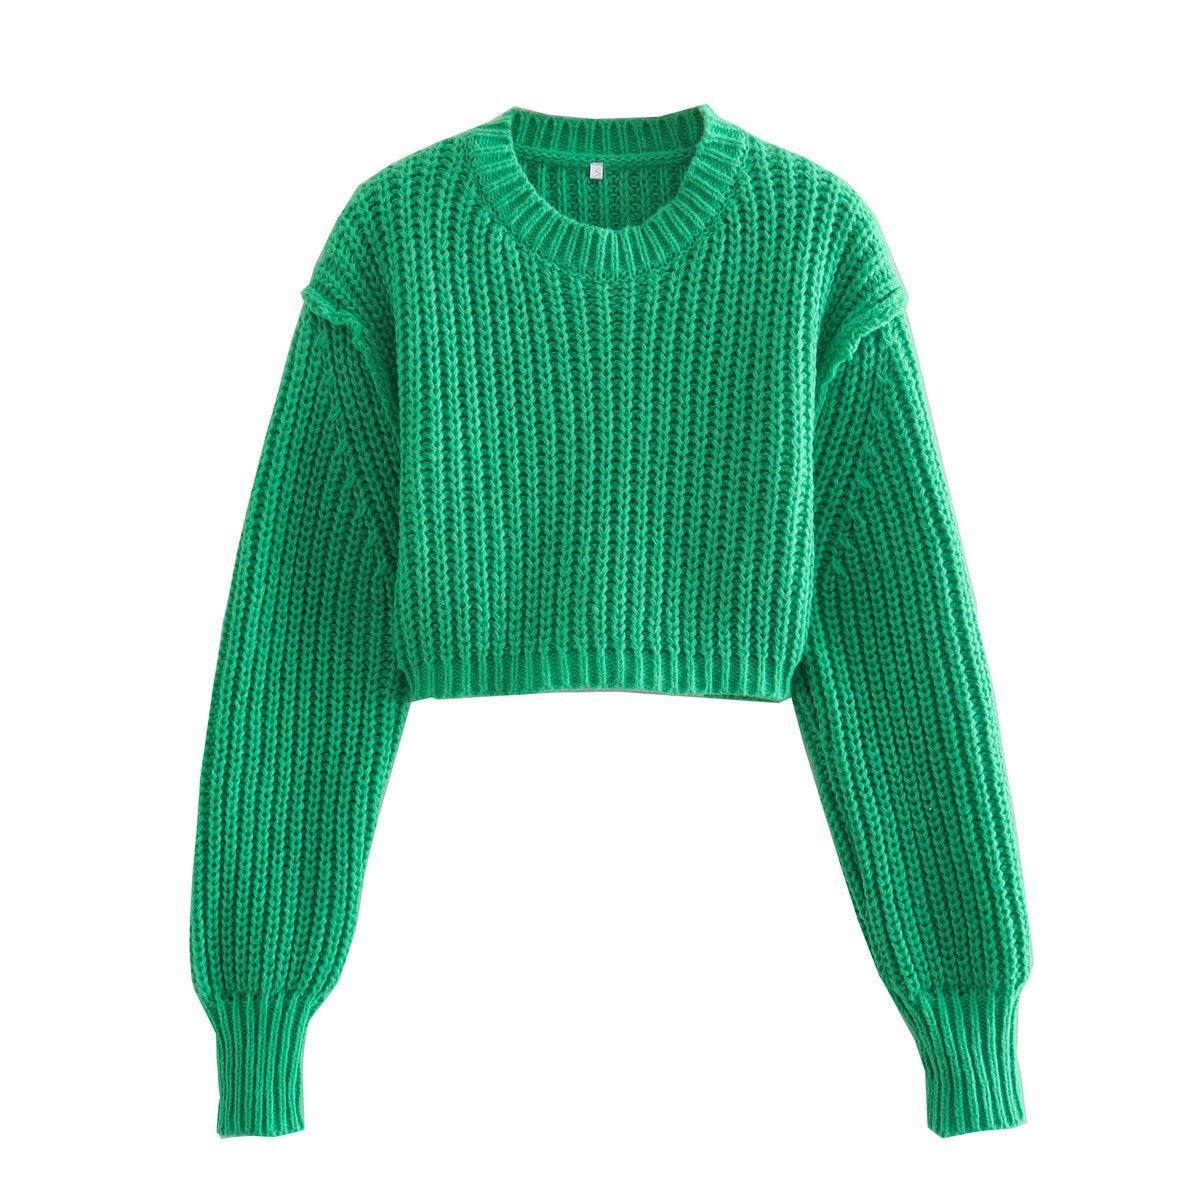 KNITTED SWEATER - PRIBO